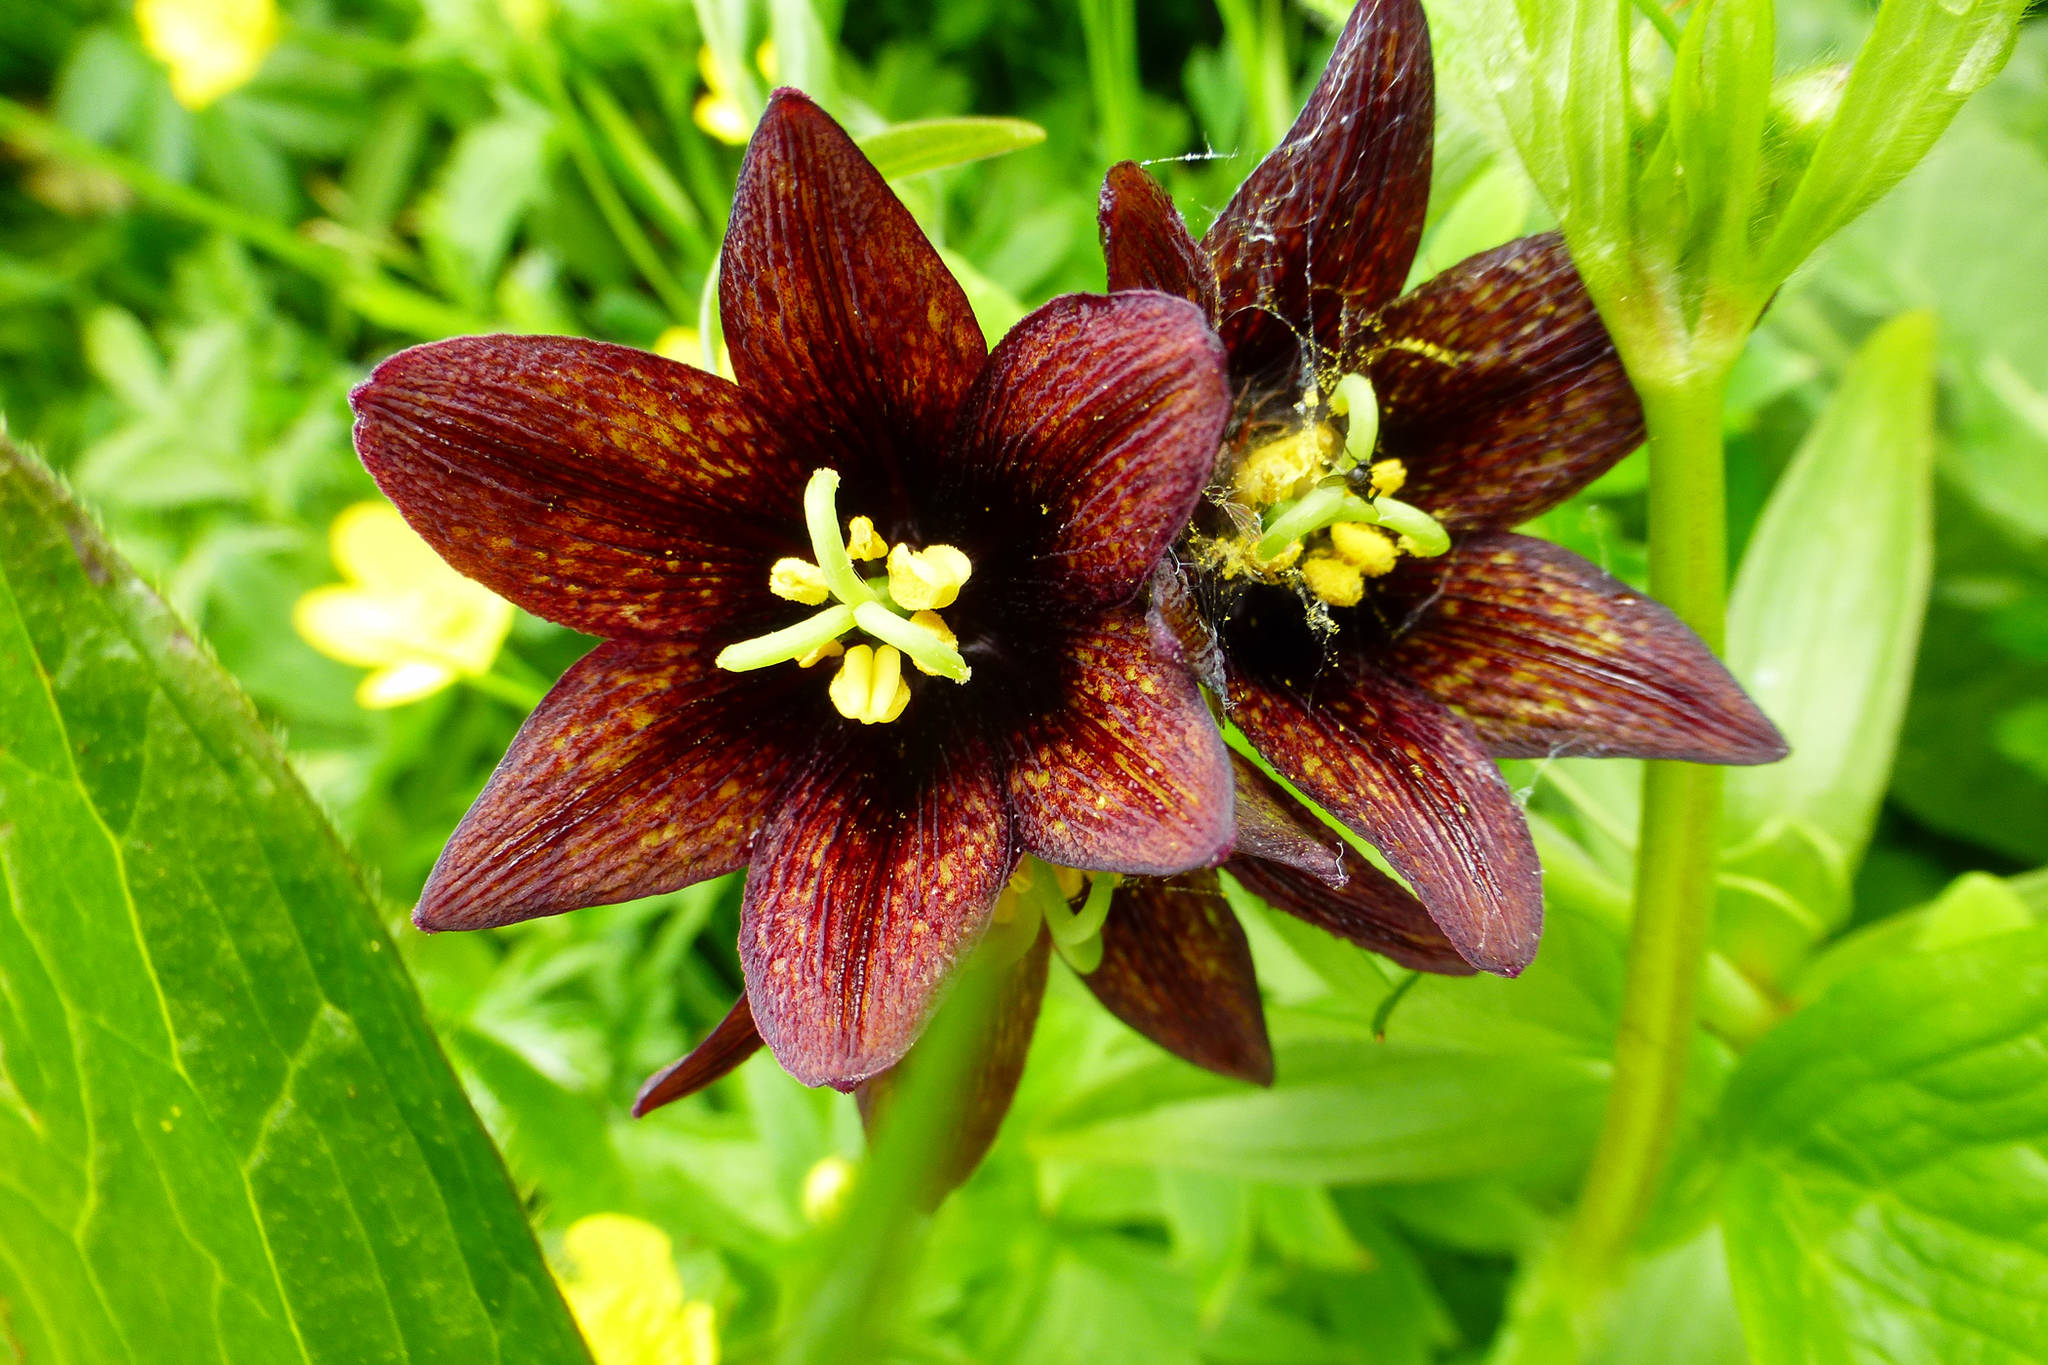 Chocolate lilies abound in Cowee Creek meadow on June 7. (Photo by Denise Carroll)